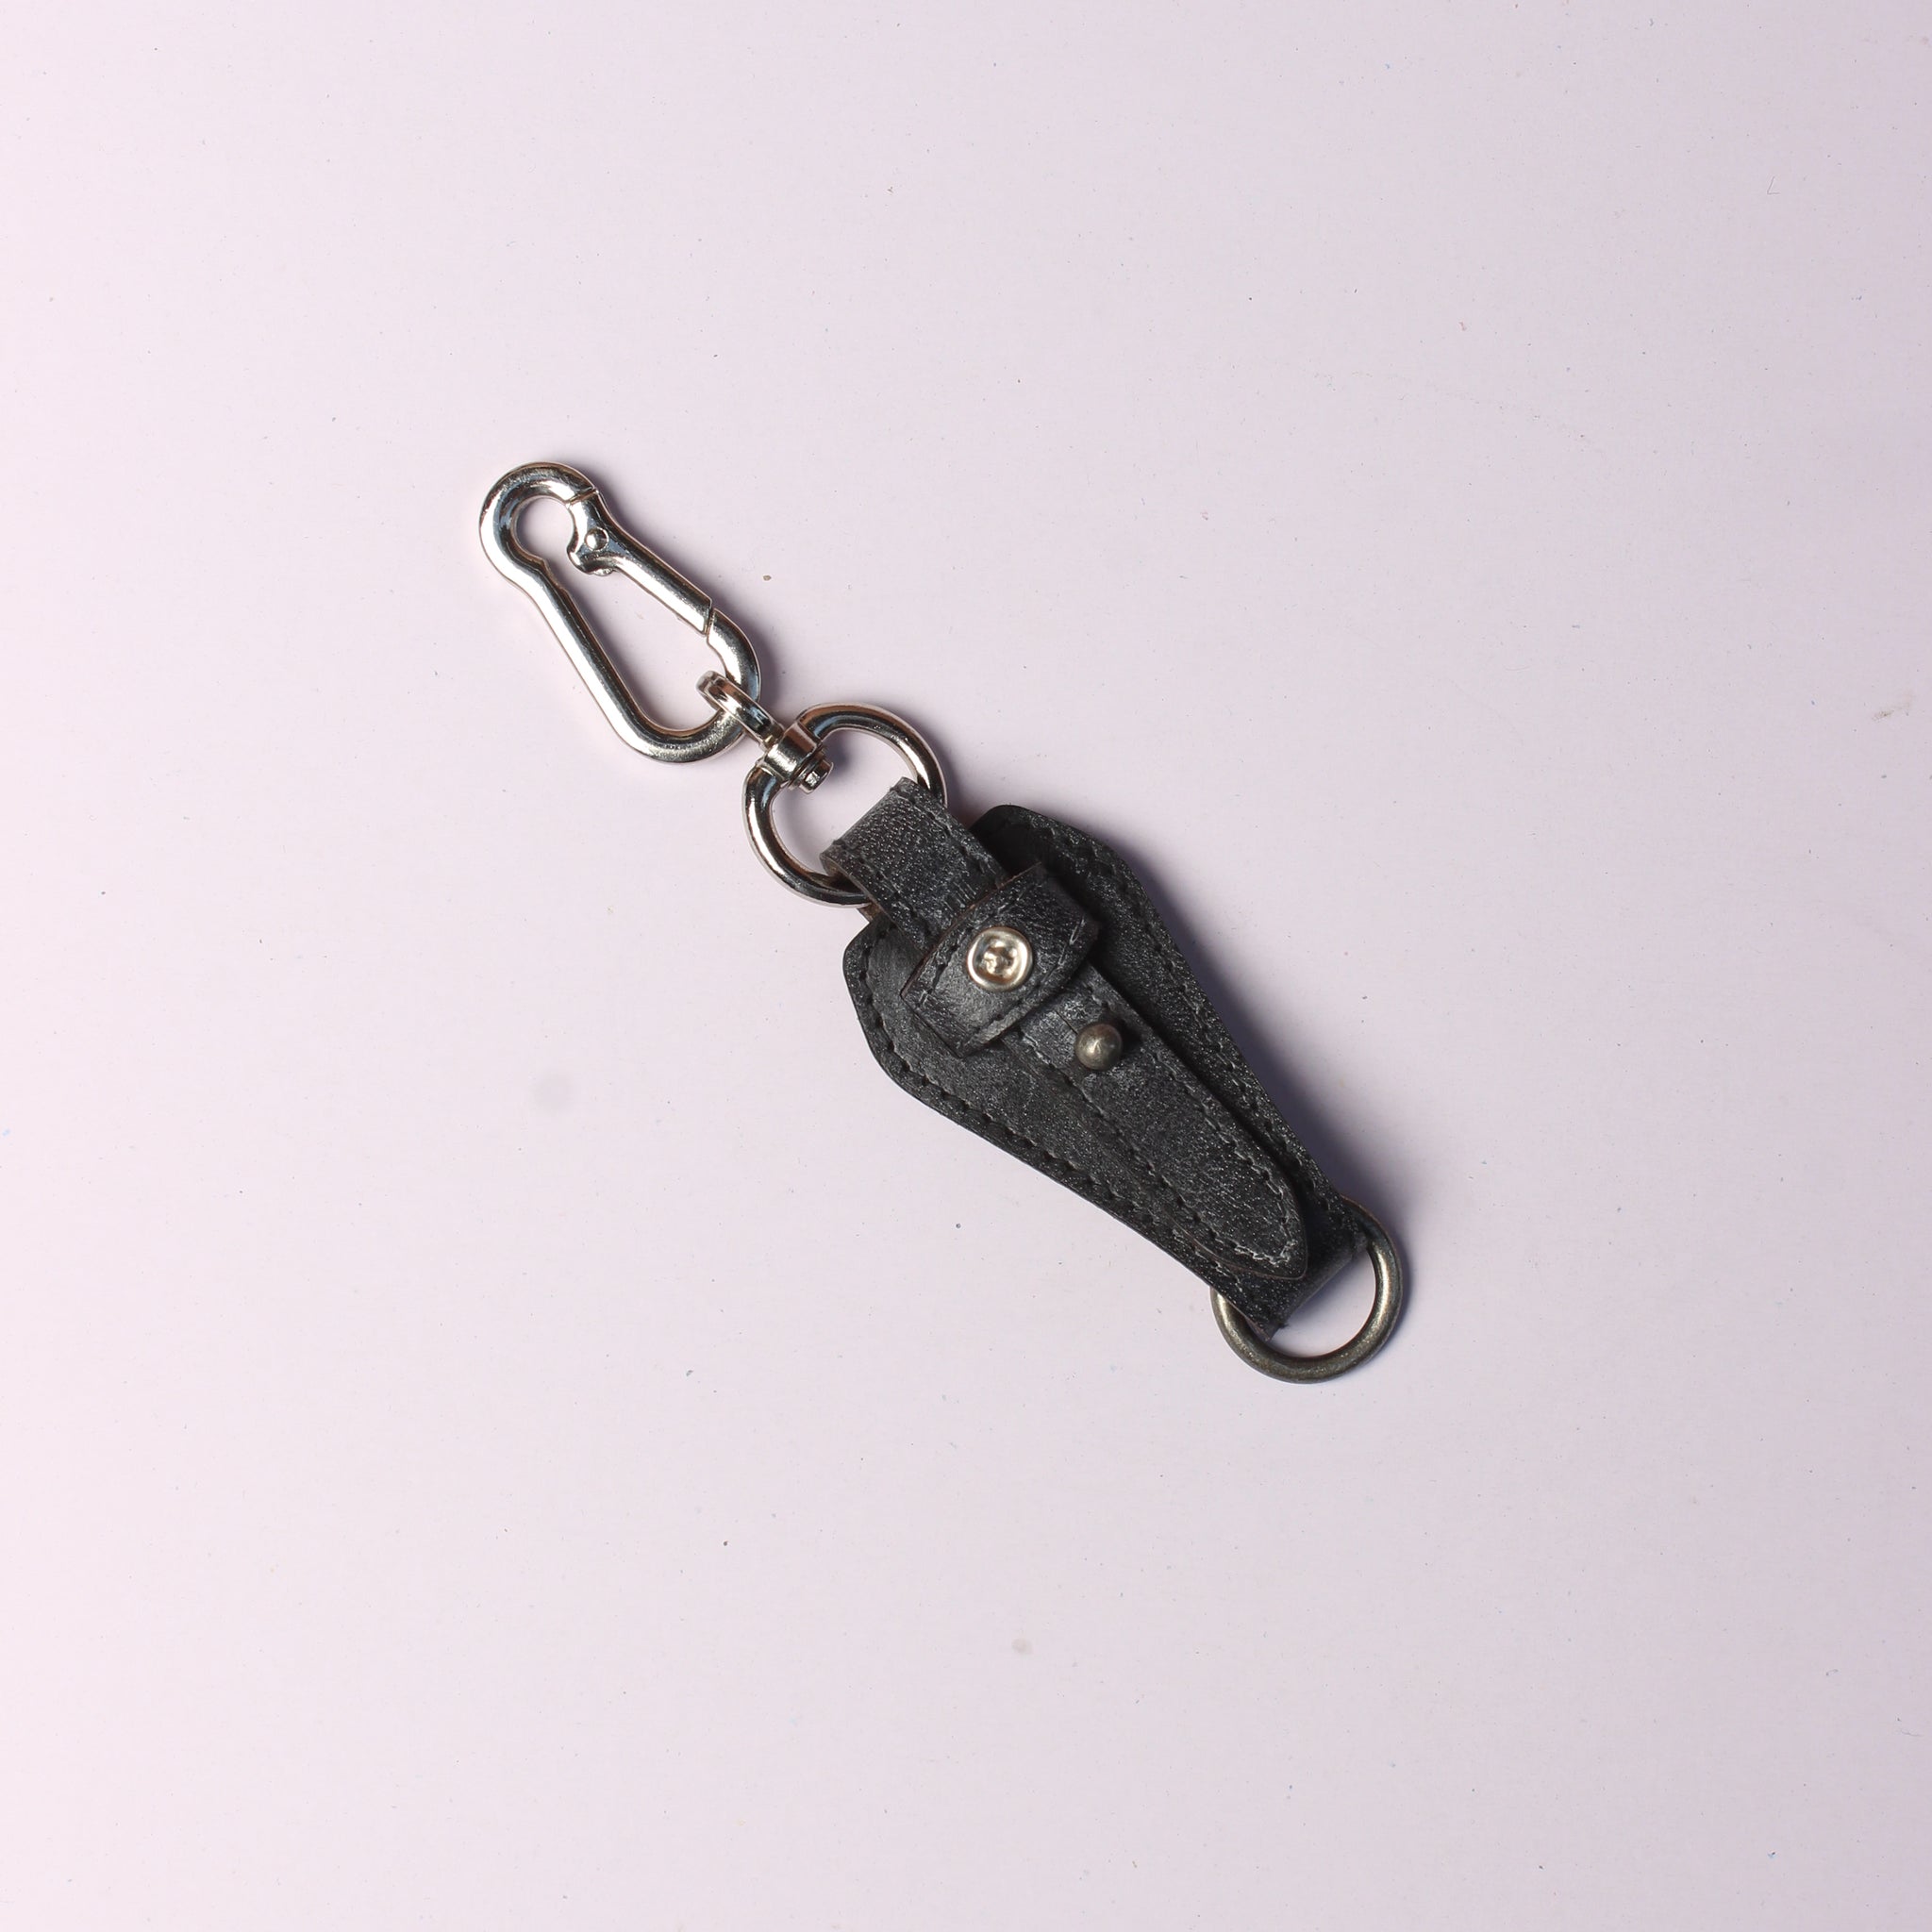 Vintage-Inspired Leather Keyring: Time-tested Style and Function